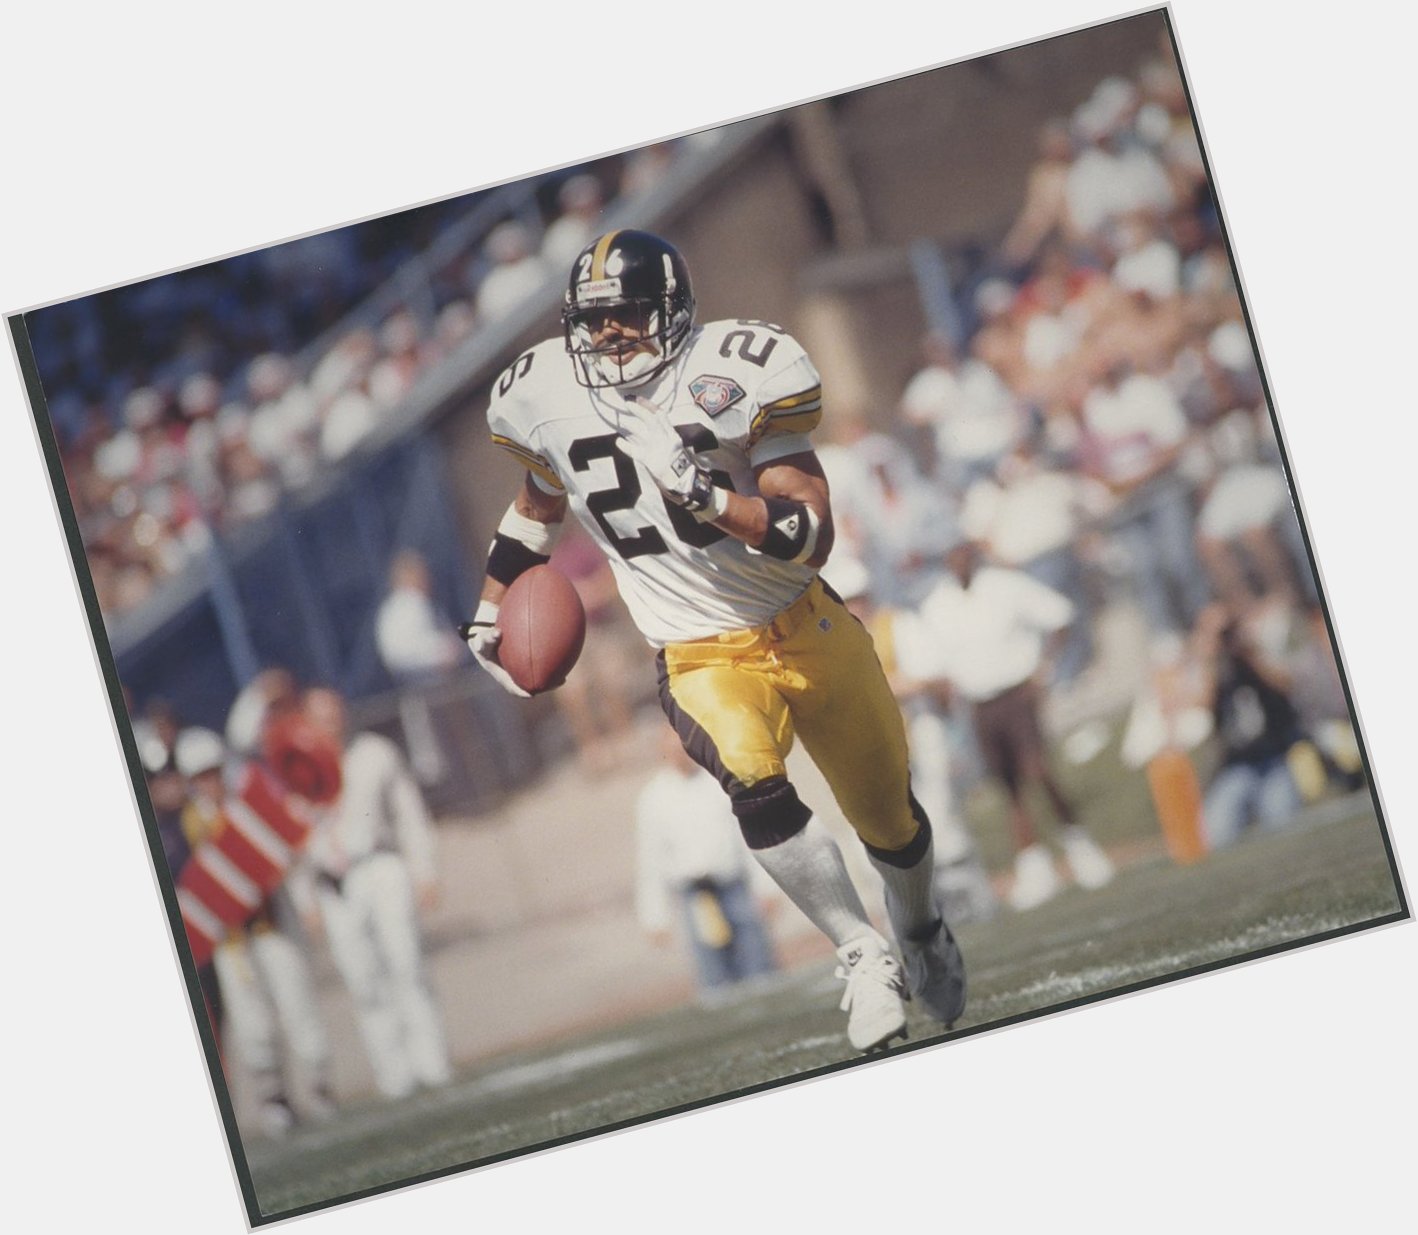 Happy Birthday to Rod Woodson, who turns 52 today! 